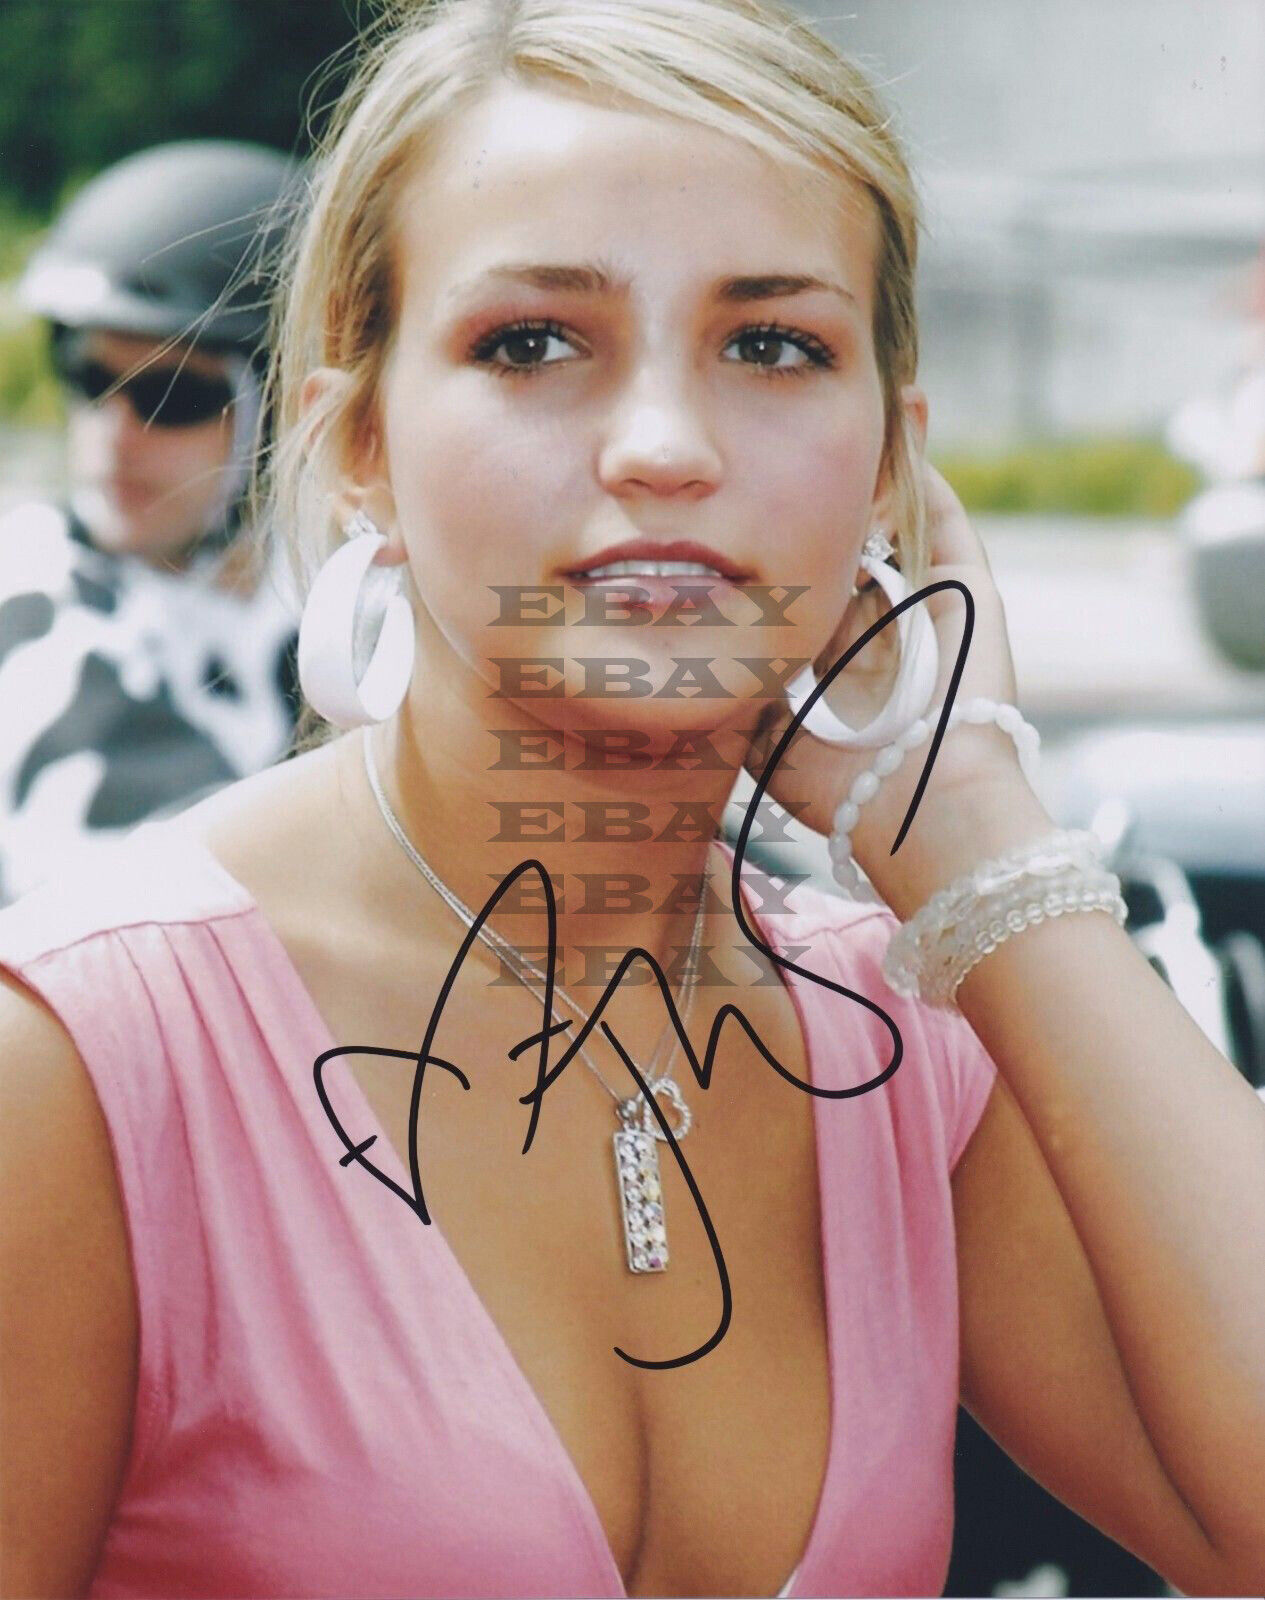 Jamie Lynn Spears Autographed Signed 8x10 Photo Poster painting Rep